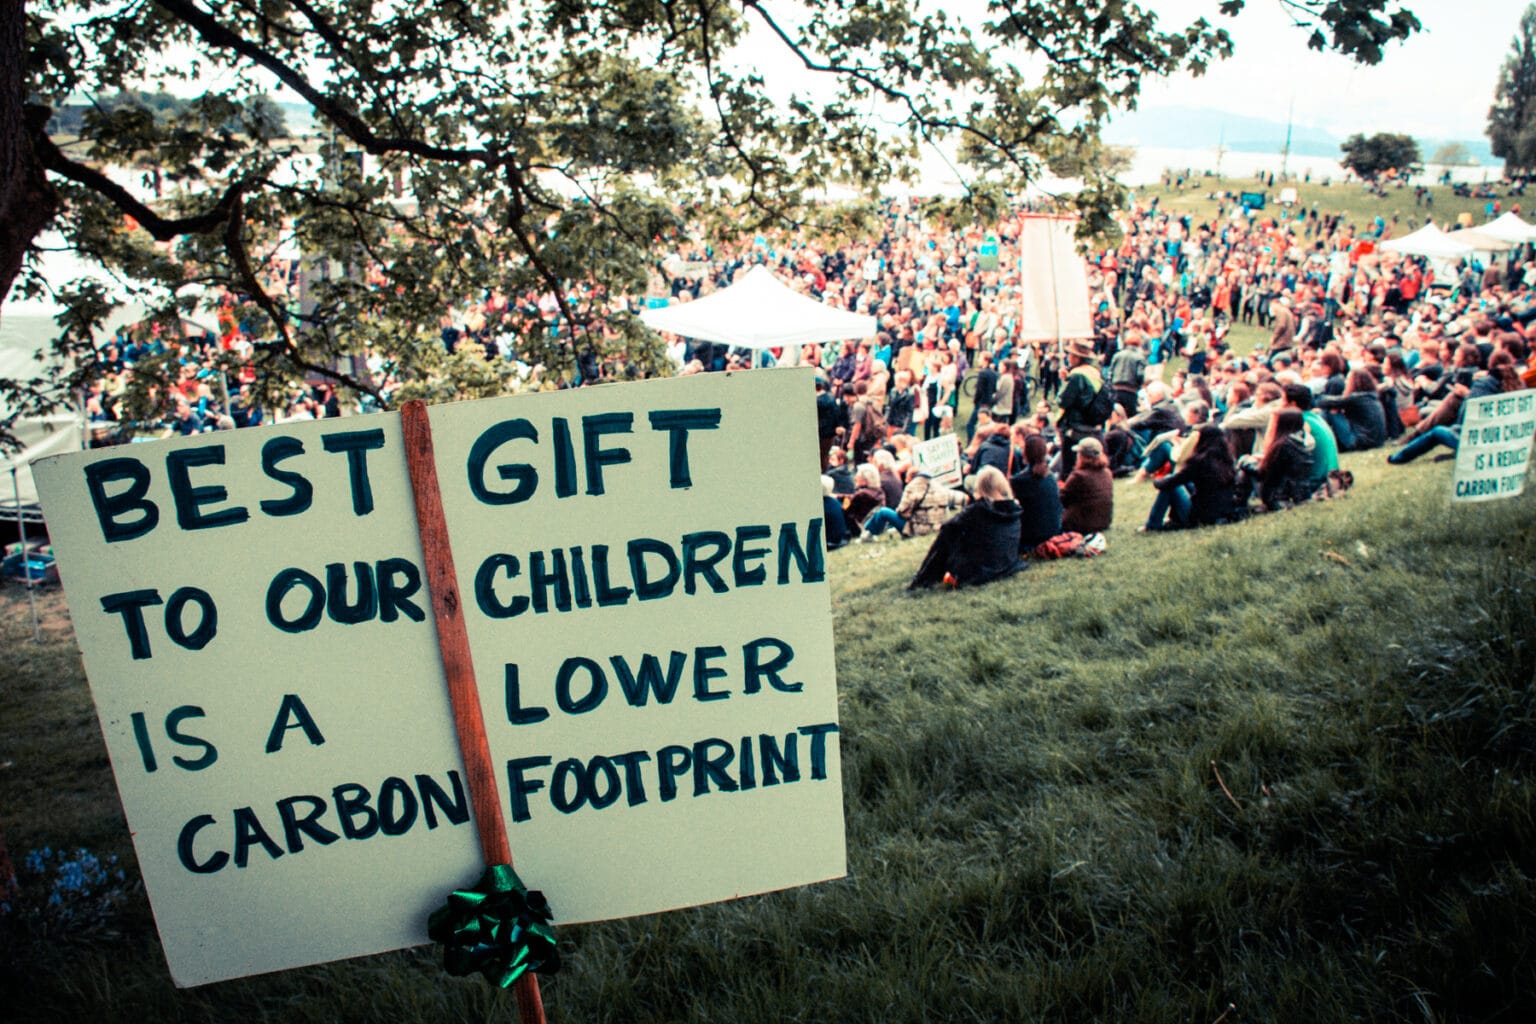 Hand-painted poster reading 'Best gift to our children is a lower carbon footprint' and crowds seated on grassy hill beyond